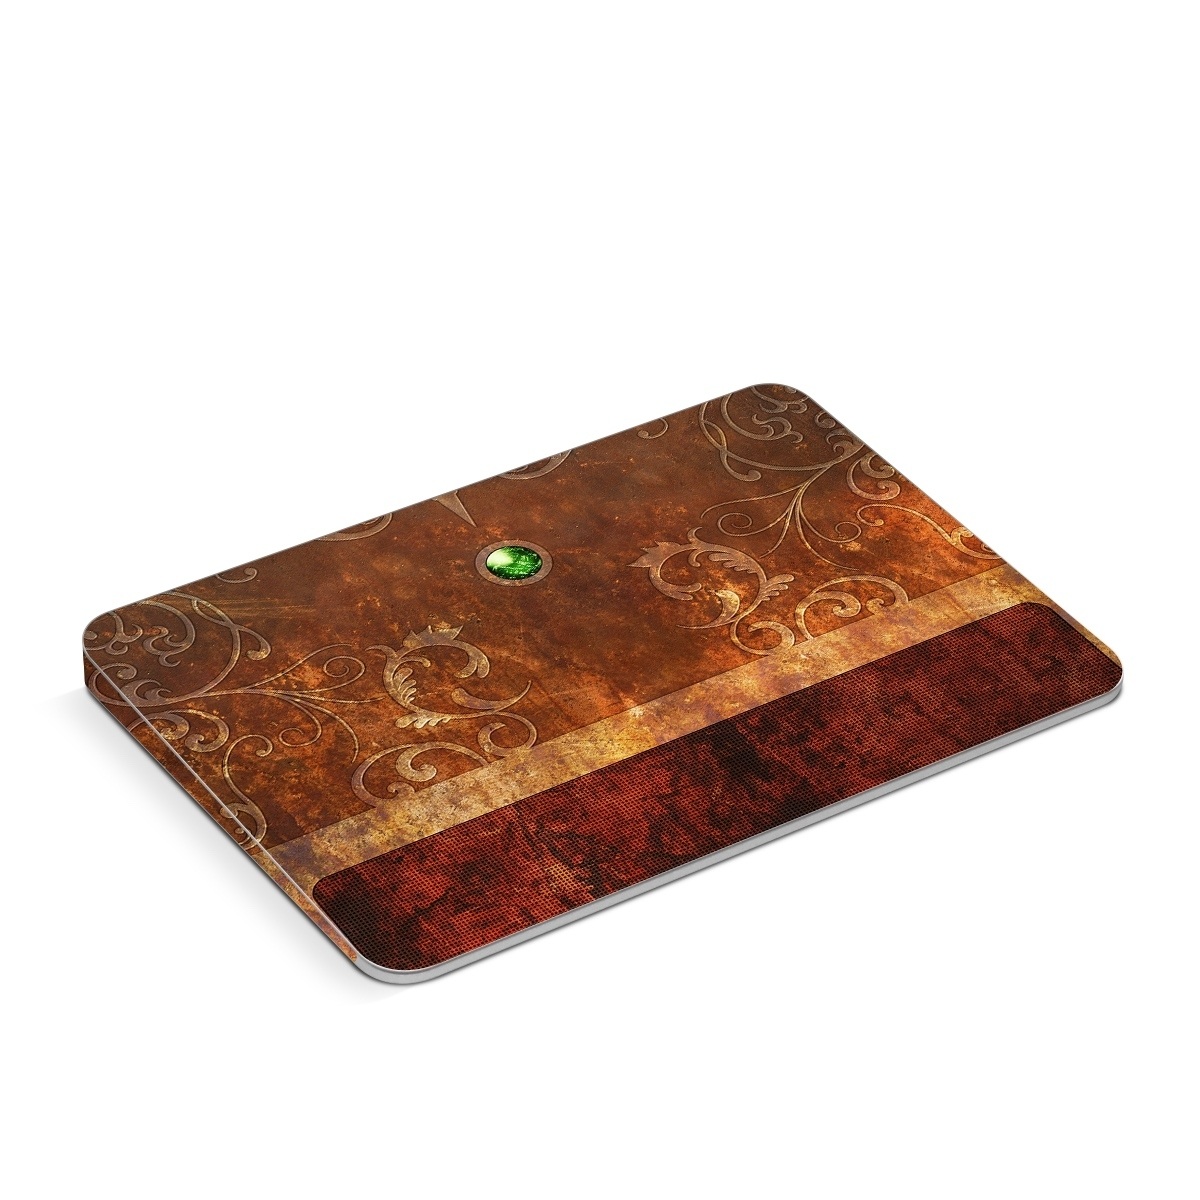 Apple Magic Trackpad Skin design, with brown, red, yellow, green, orange colors